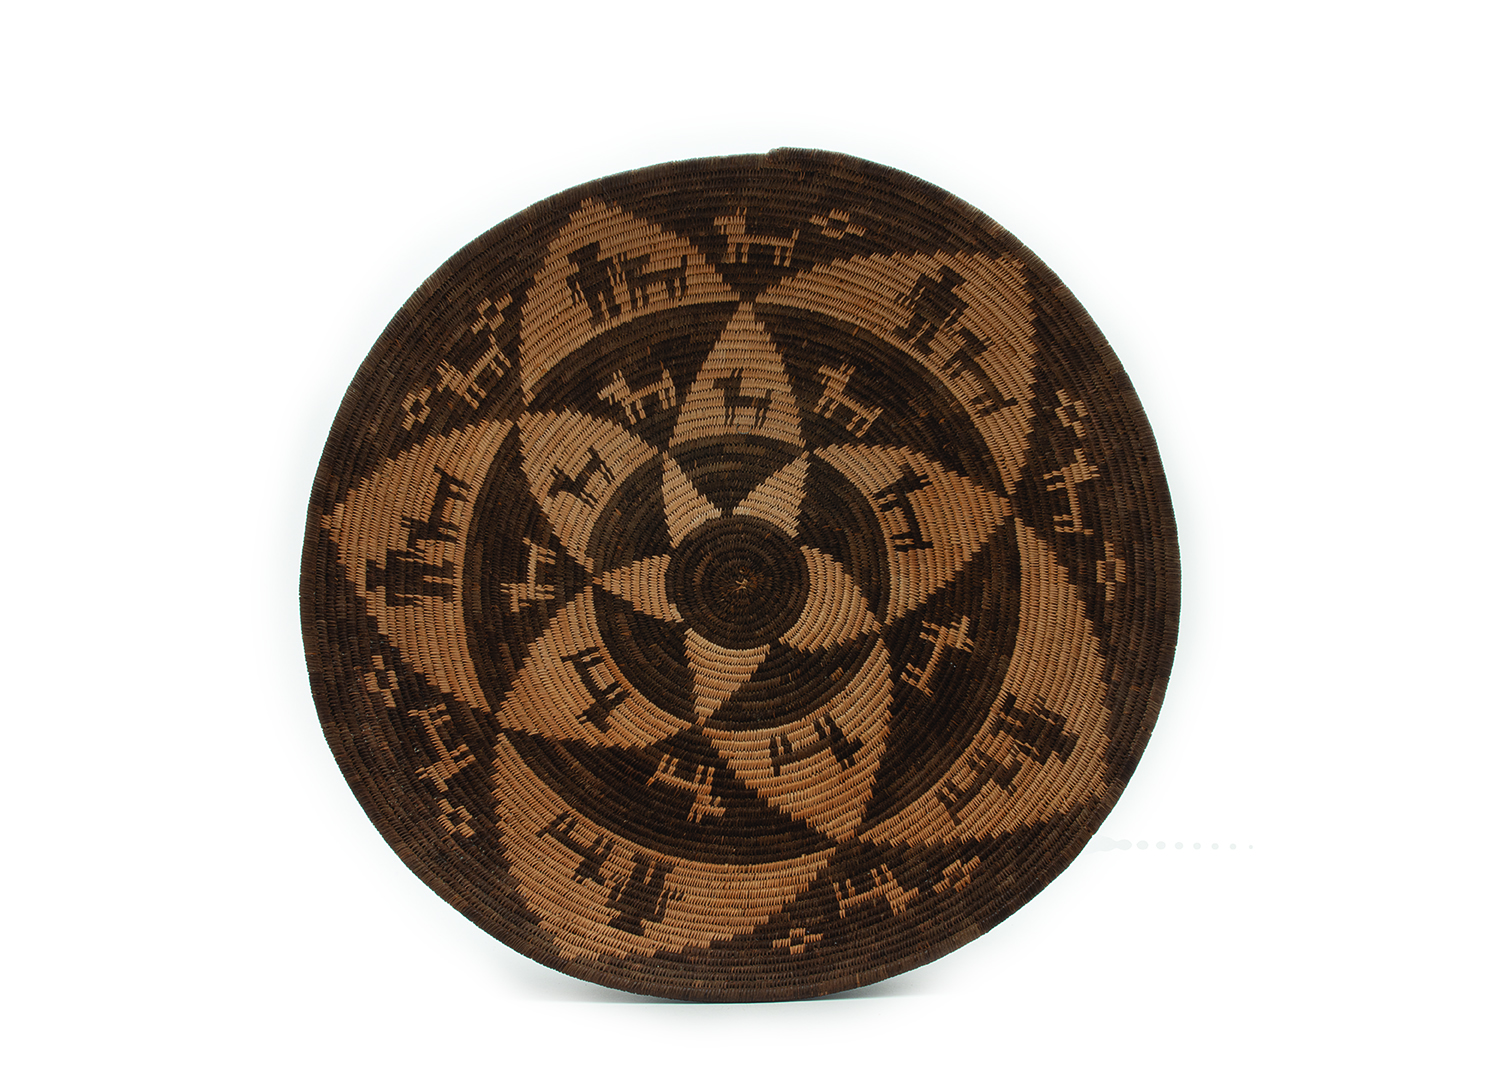 A round woven basket with a geometric pattern of interlocking triangles and abstract shapes, using various shades of brown.